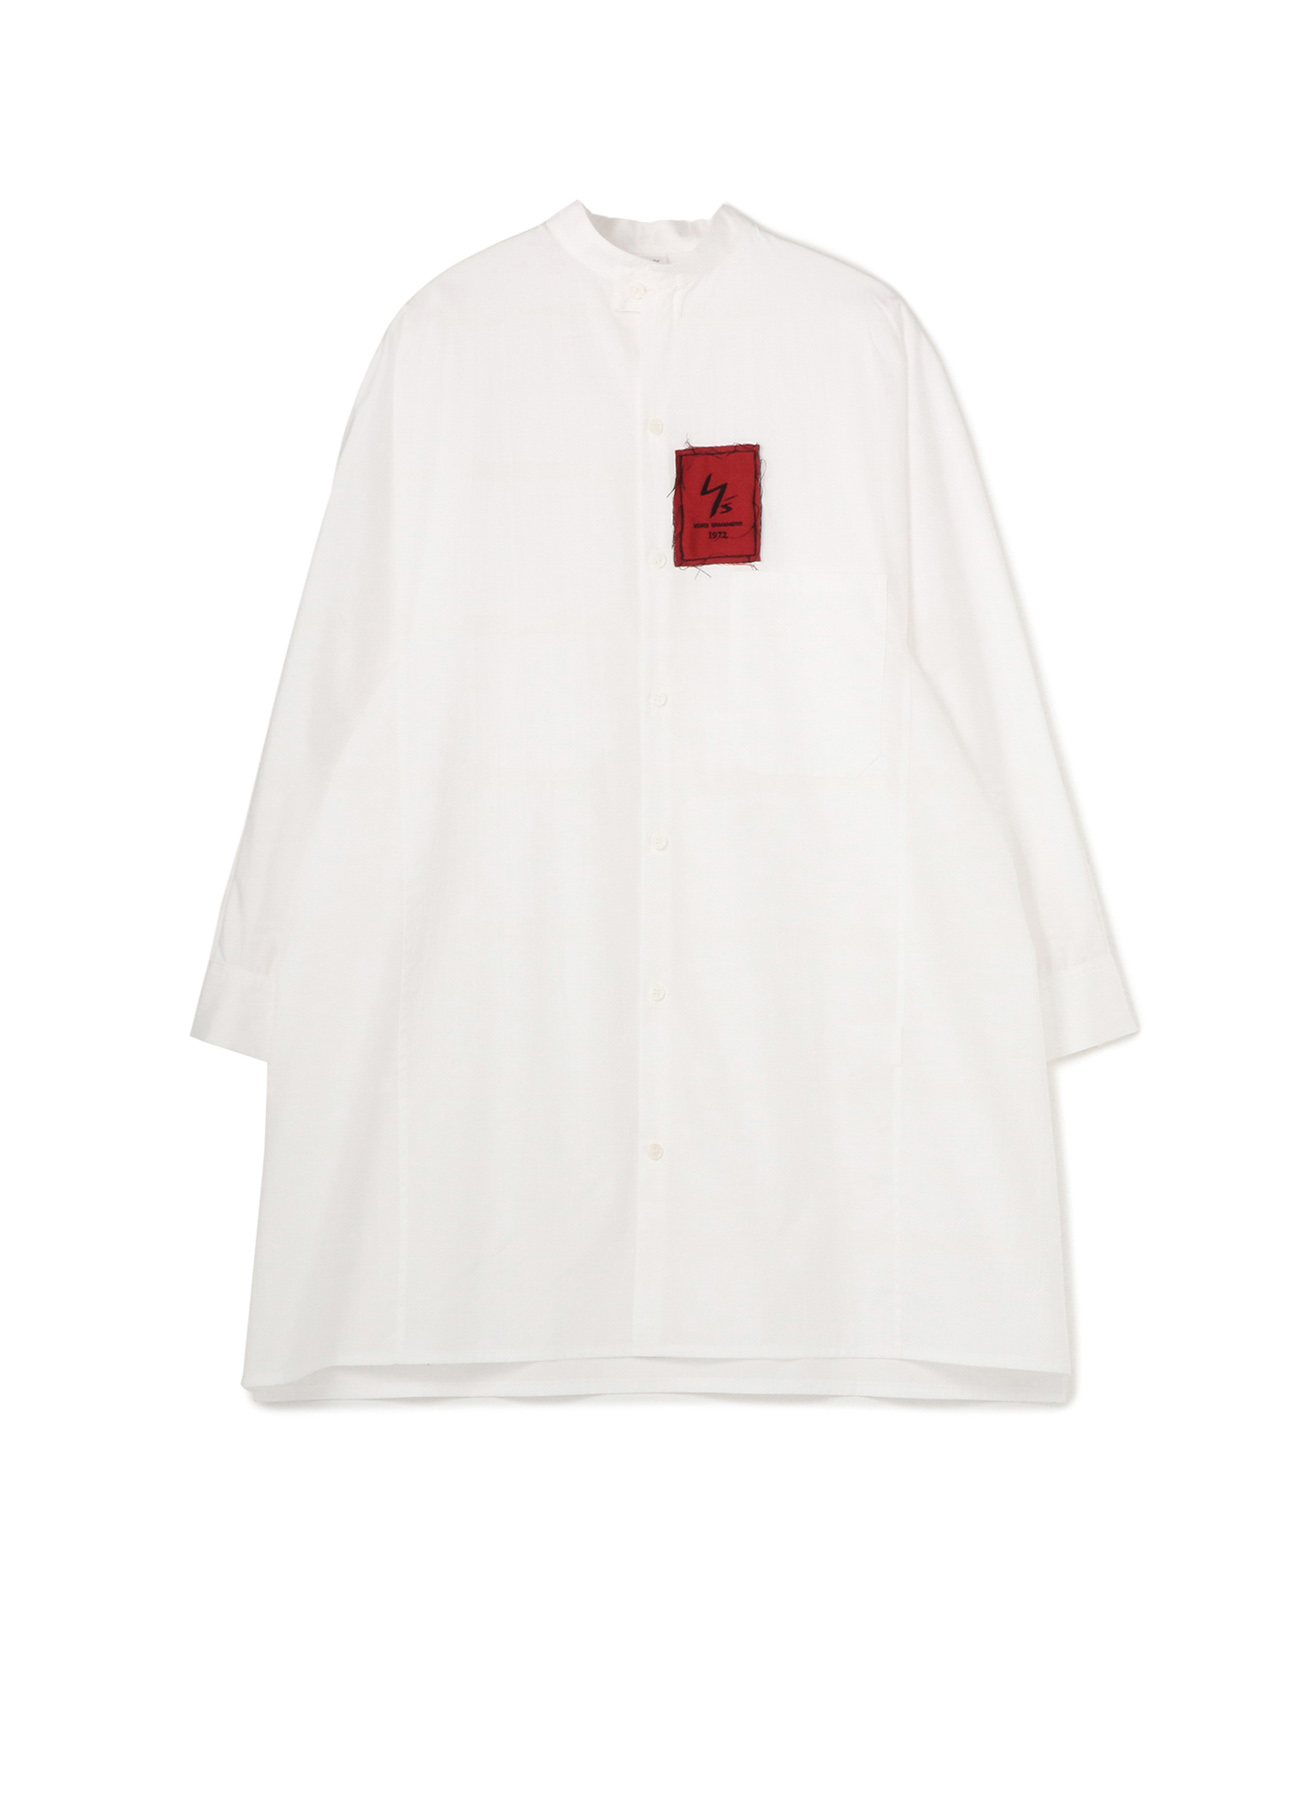 [Y's1972] LOGO PATCH BROAD STAND COLLAR SHIRT